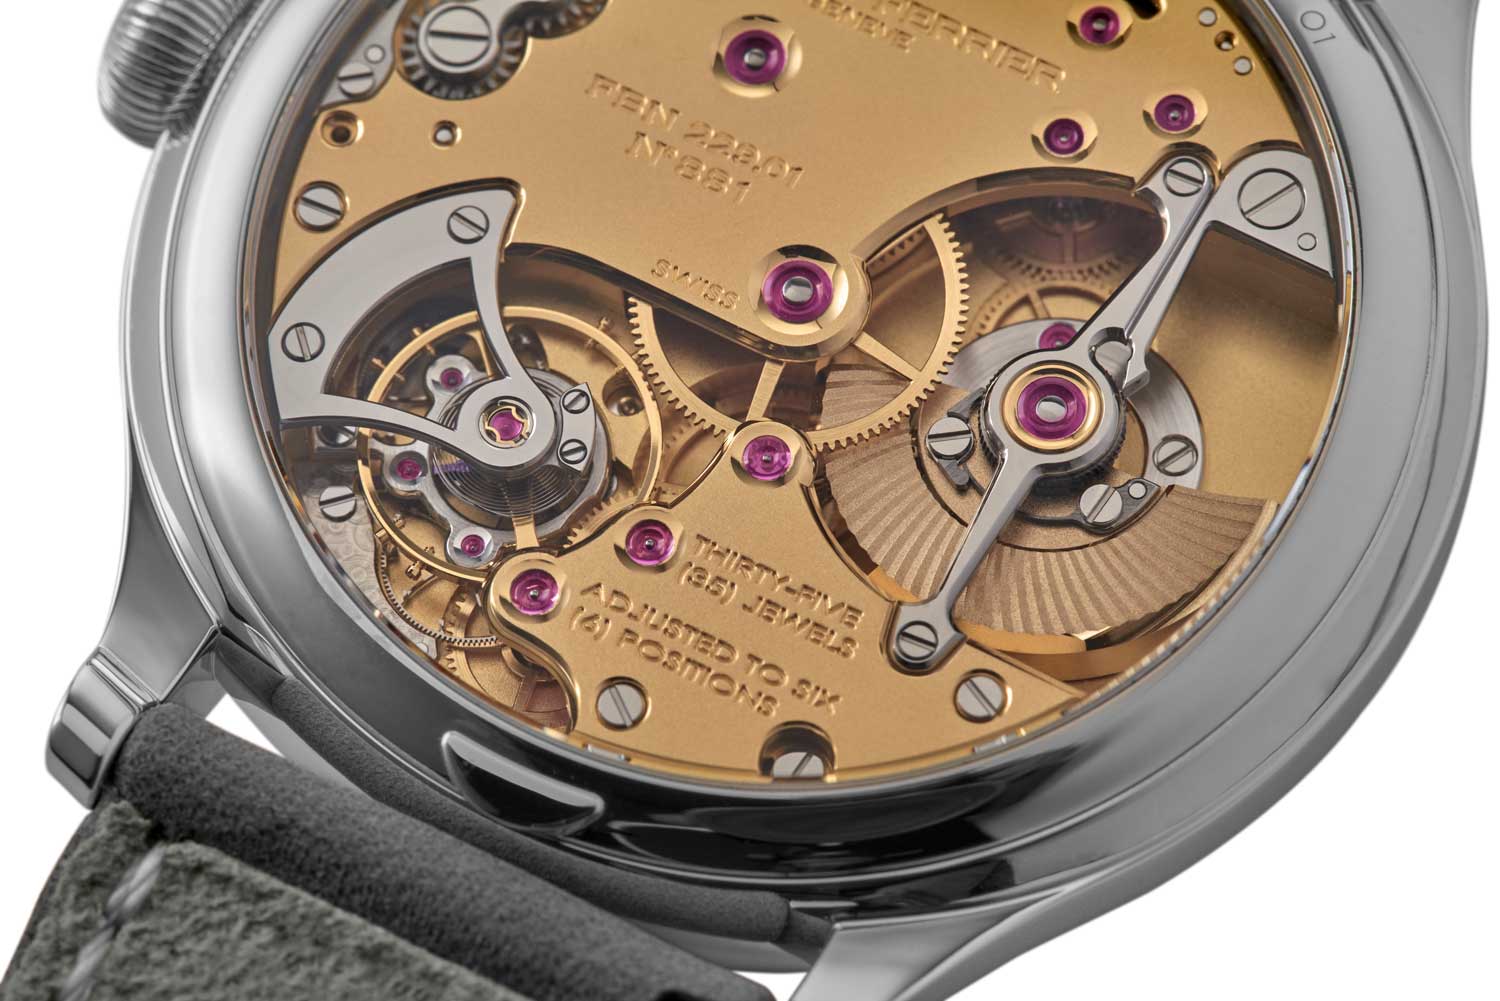 The mirror polished bridge of the FBN 229.01 mirco rotor, fashioned to look like the bridges used for tourbillons in classical watchmaking (©Revolution)